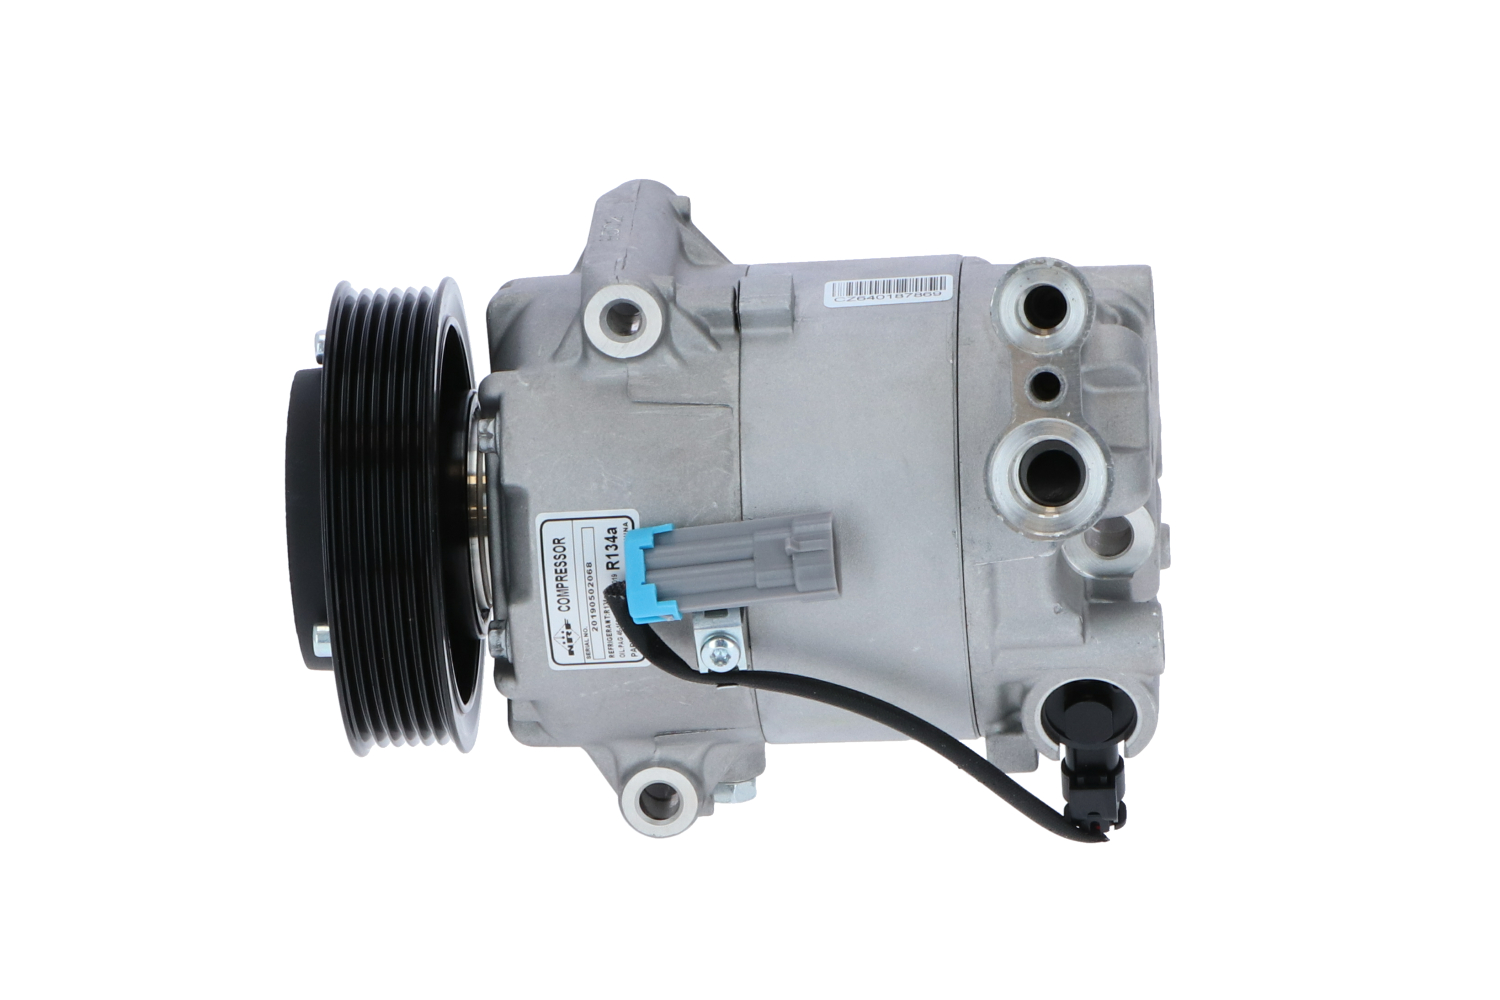 NRF 32781 Air conditioning compressor CVC, 12V, PAG 46, with PAG compressor oil, with gaskets/seals